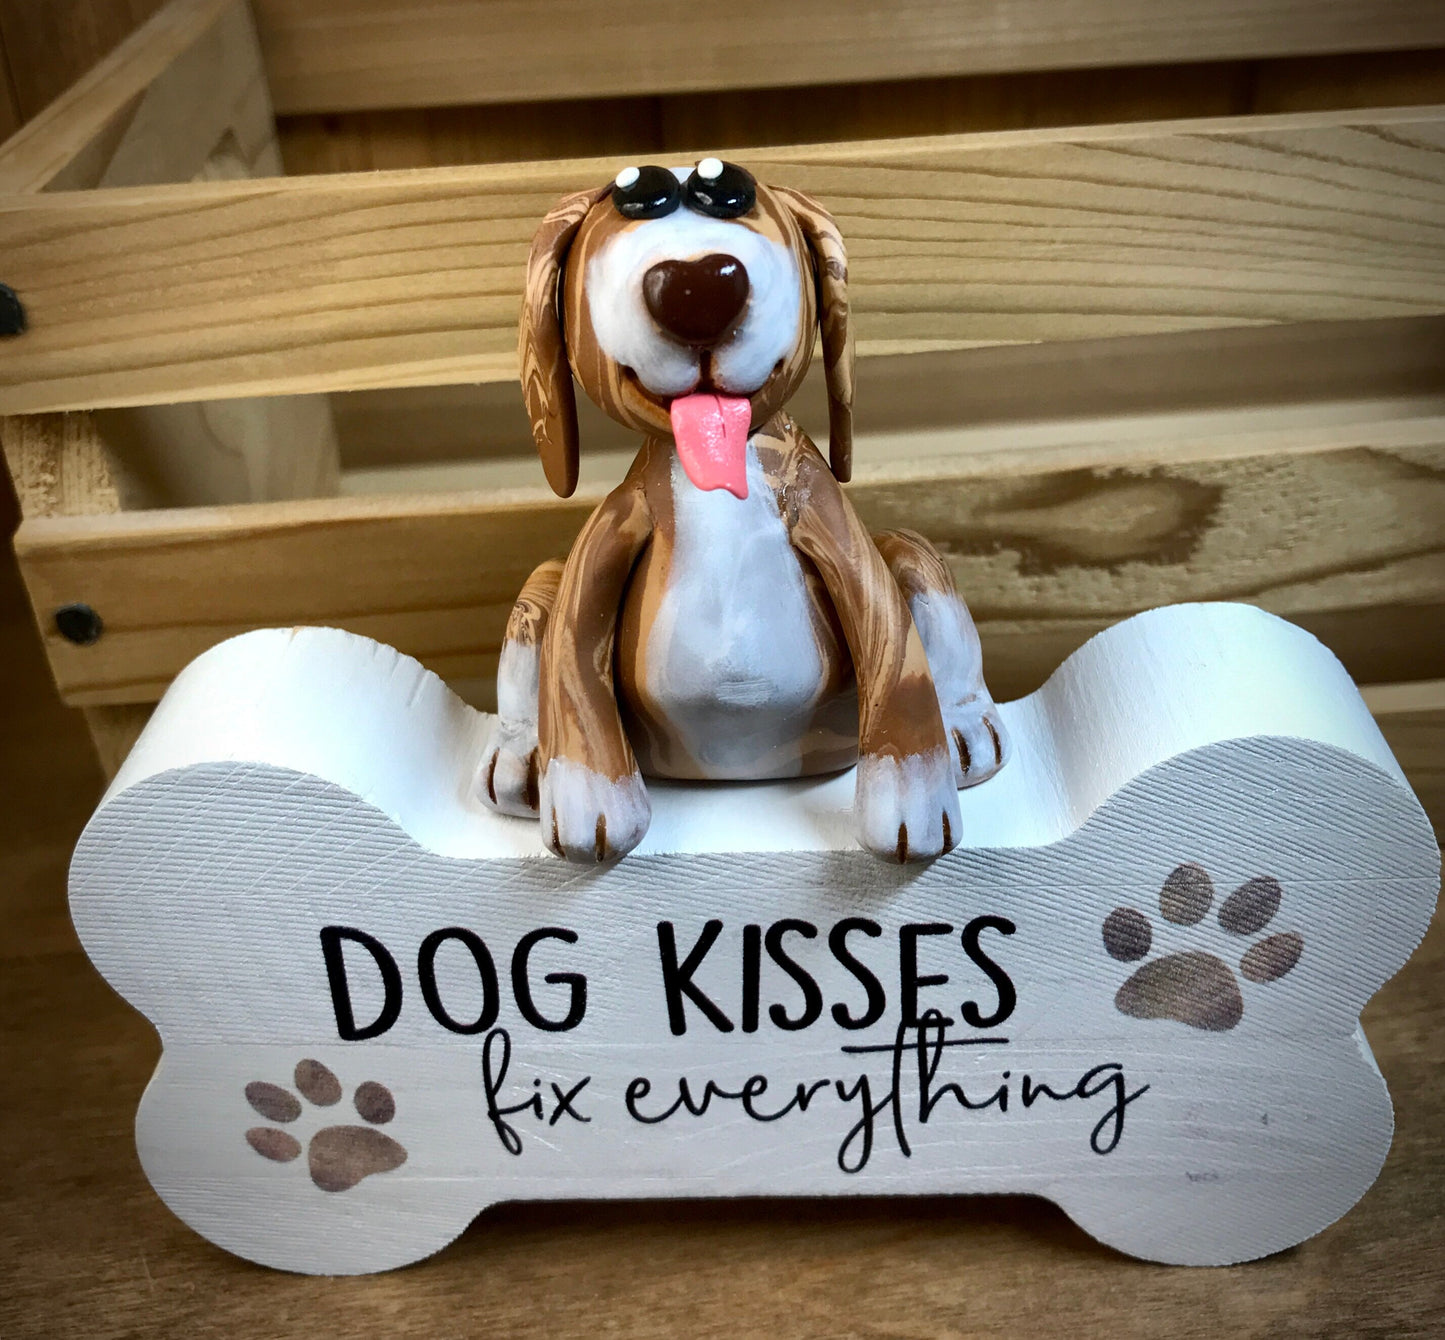 Dog Kisses Fix Everything Polymer Clay and Wood Home Decor, Cute Puppy, Sweet Dog, Love Dogs, Funny Pet Collectible, Happy Pup Tongue Out